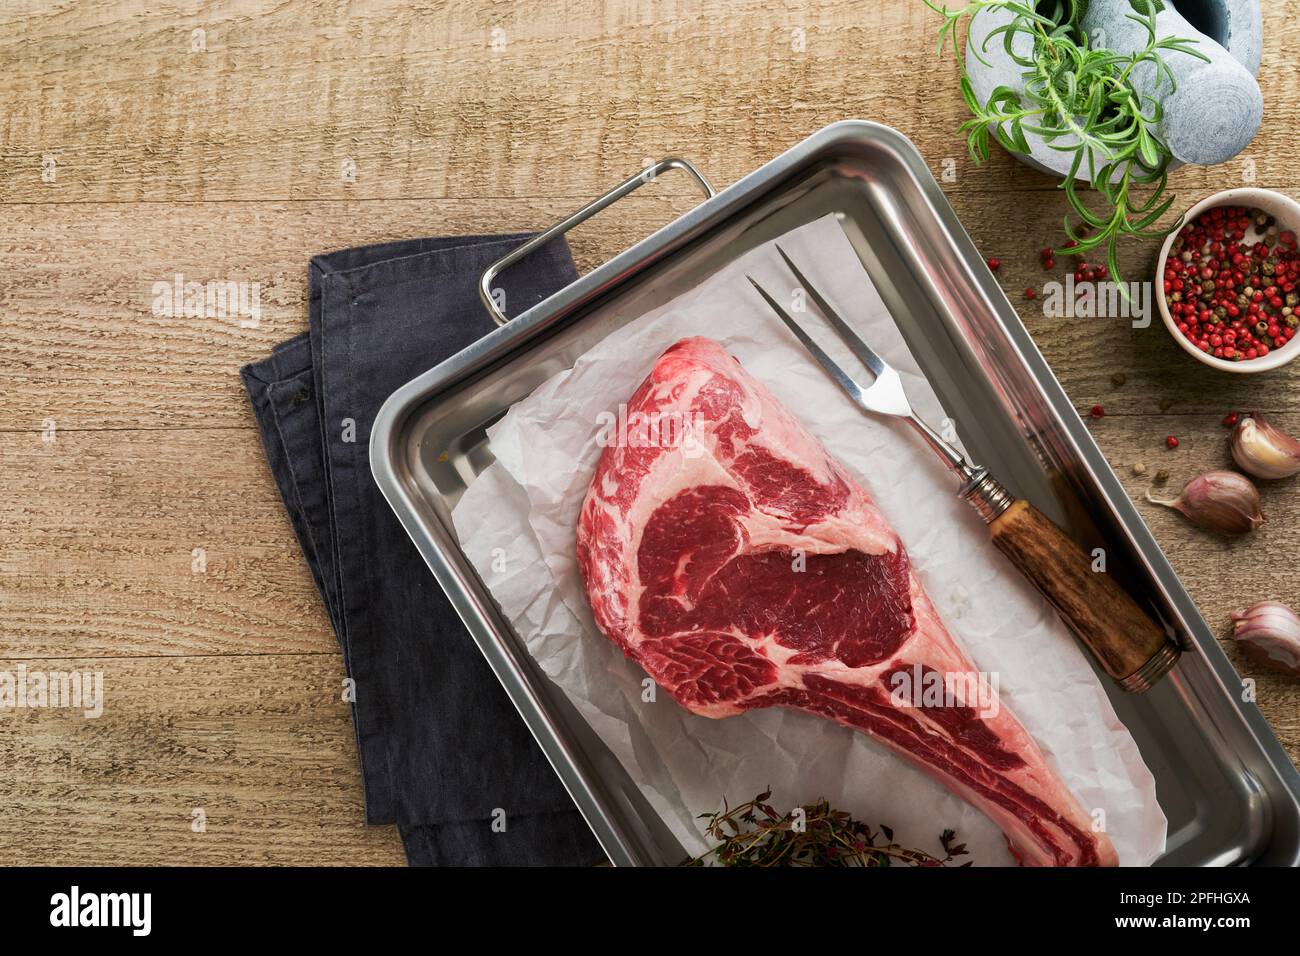 Fresh tomahawk raw steak. Dry aged raw tomahawk beef steak with herbs and salt on old wooden background. Preparing to grill.  Top view and copy space. Stock Photo